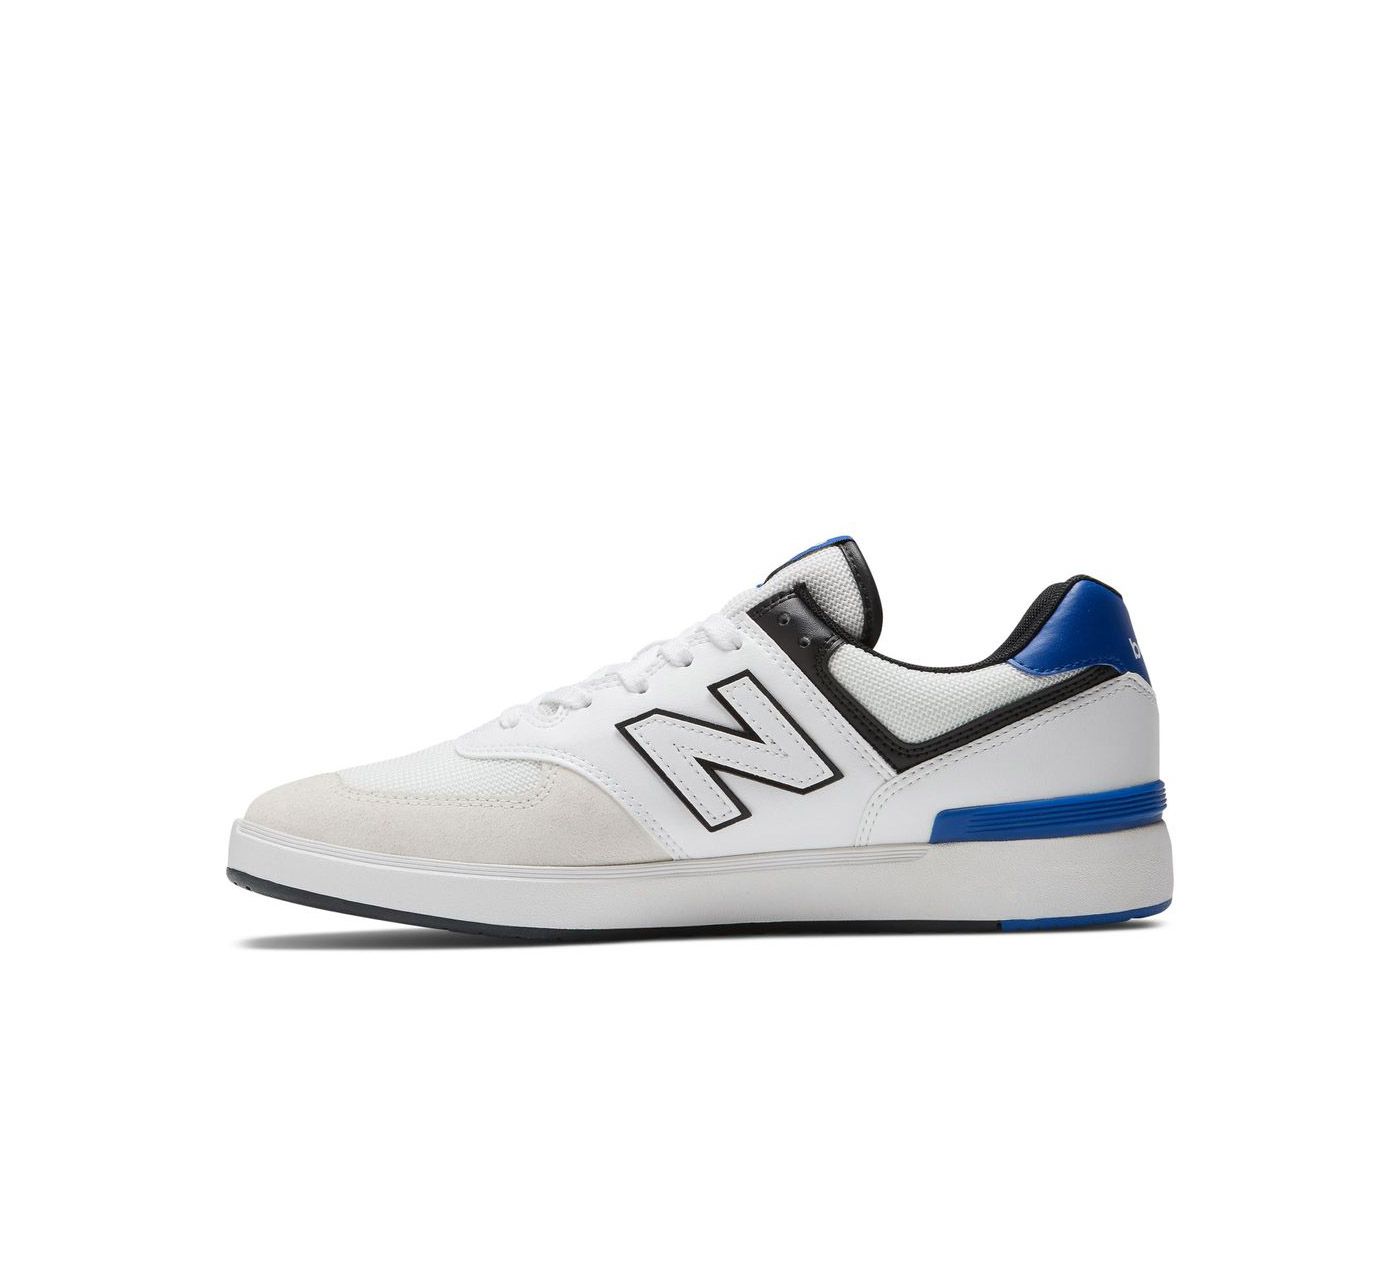 New Balance Ct574 trainers in white